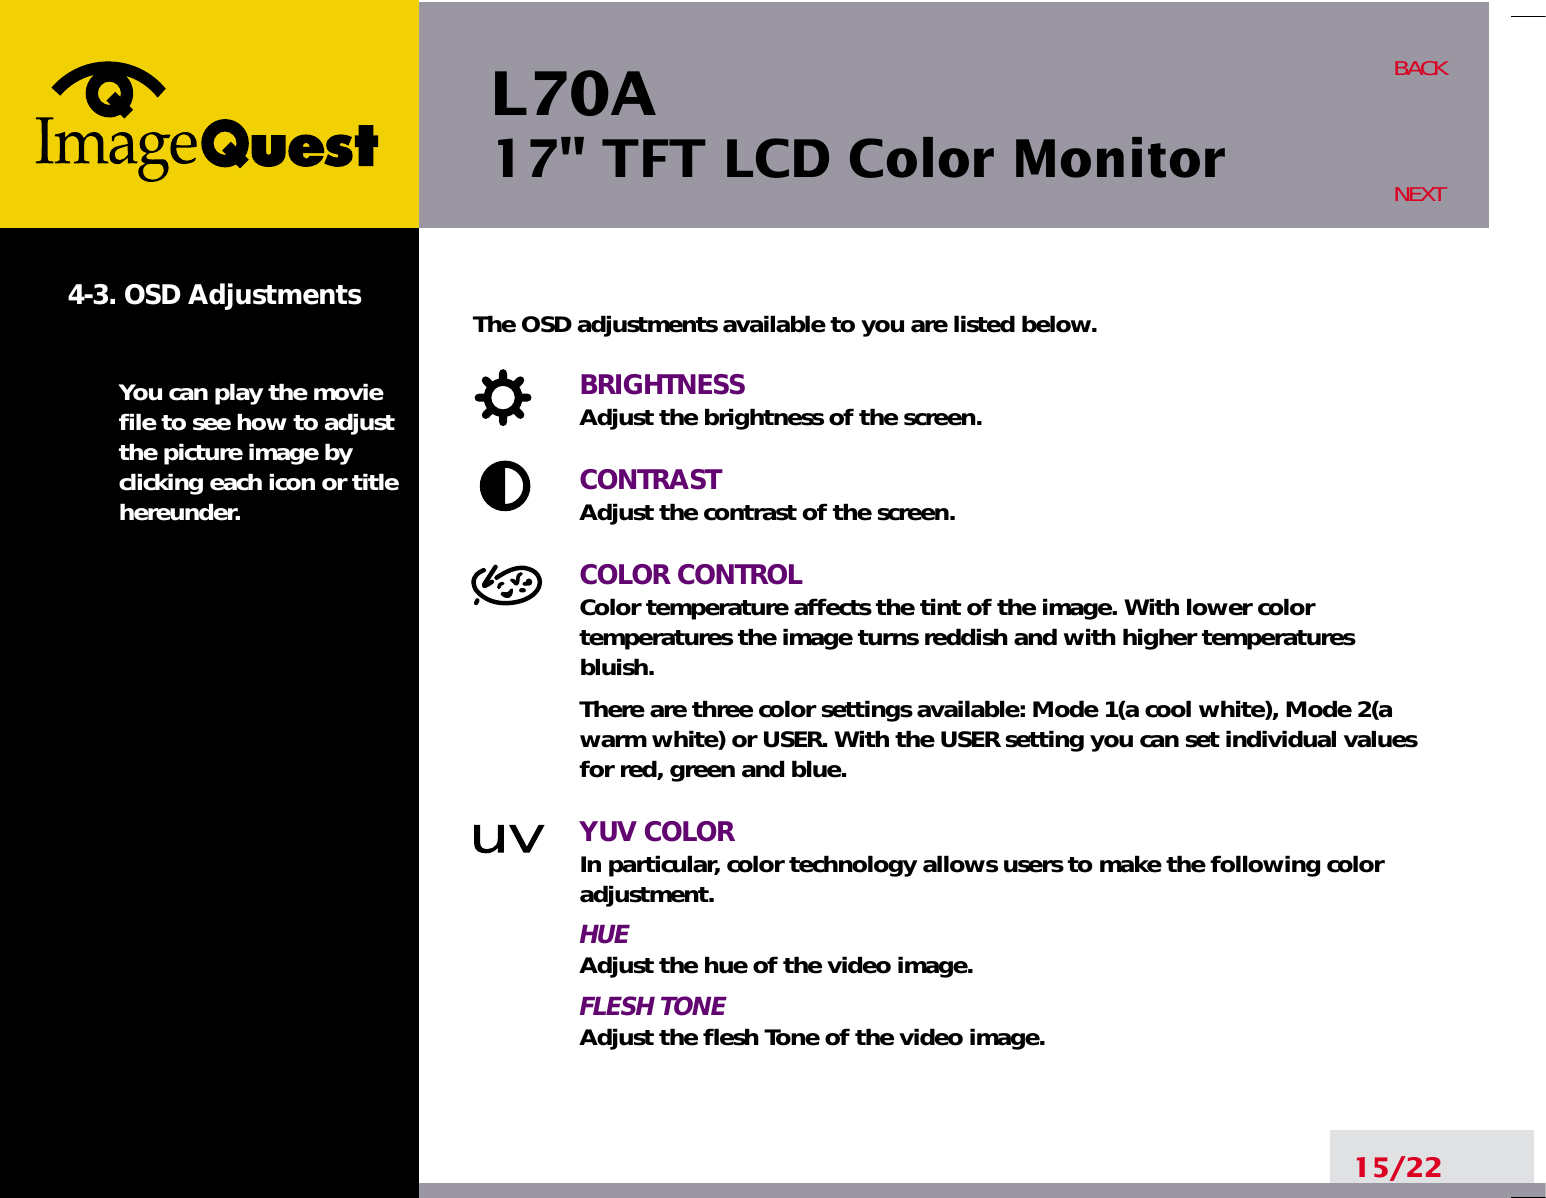 L70A17&quot; TFT LCD Color Monitor15/22BACKNEXT4-3. OSD AdjustmentsYou can play the moviefile to see how to adjustthe picture image byclicking each icon or titlehereunder.The OSD adjustments available to you are listed below.BRIGHTNESSAdjust the brightness of the screen.CONTRASTAdjust the contrast of the screen.COLOR CONTROLColor temperature affects the tint of the image. With lower color temperatures the image turns reddish and with higher temperatures bluish.There are three color settings available: Mode 1(a cool white), Mode 2(awarm white) or USER. With the USER setting you can set individual valuesfor red, green and blue.YUV COLORIn particular, color technology allows users to make the following coloradjustment.HUEAdjust the hue of the video image.FLESH TONEAdjust the flesh Tone of the video image.